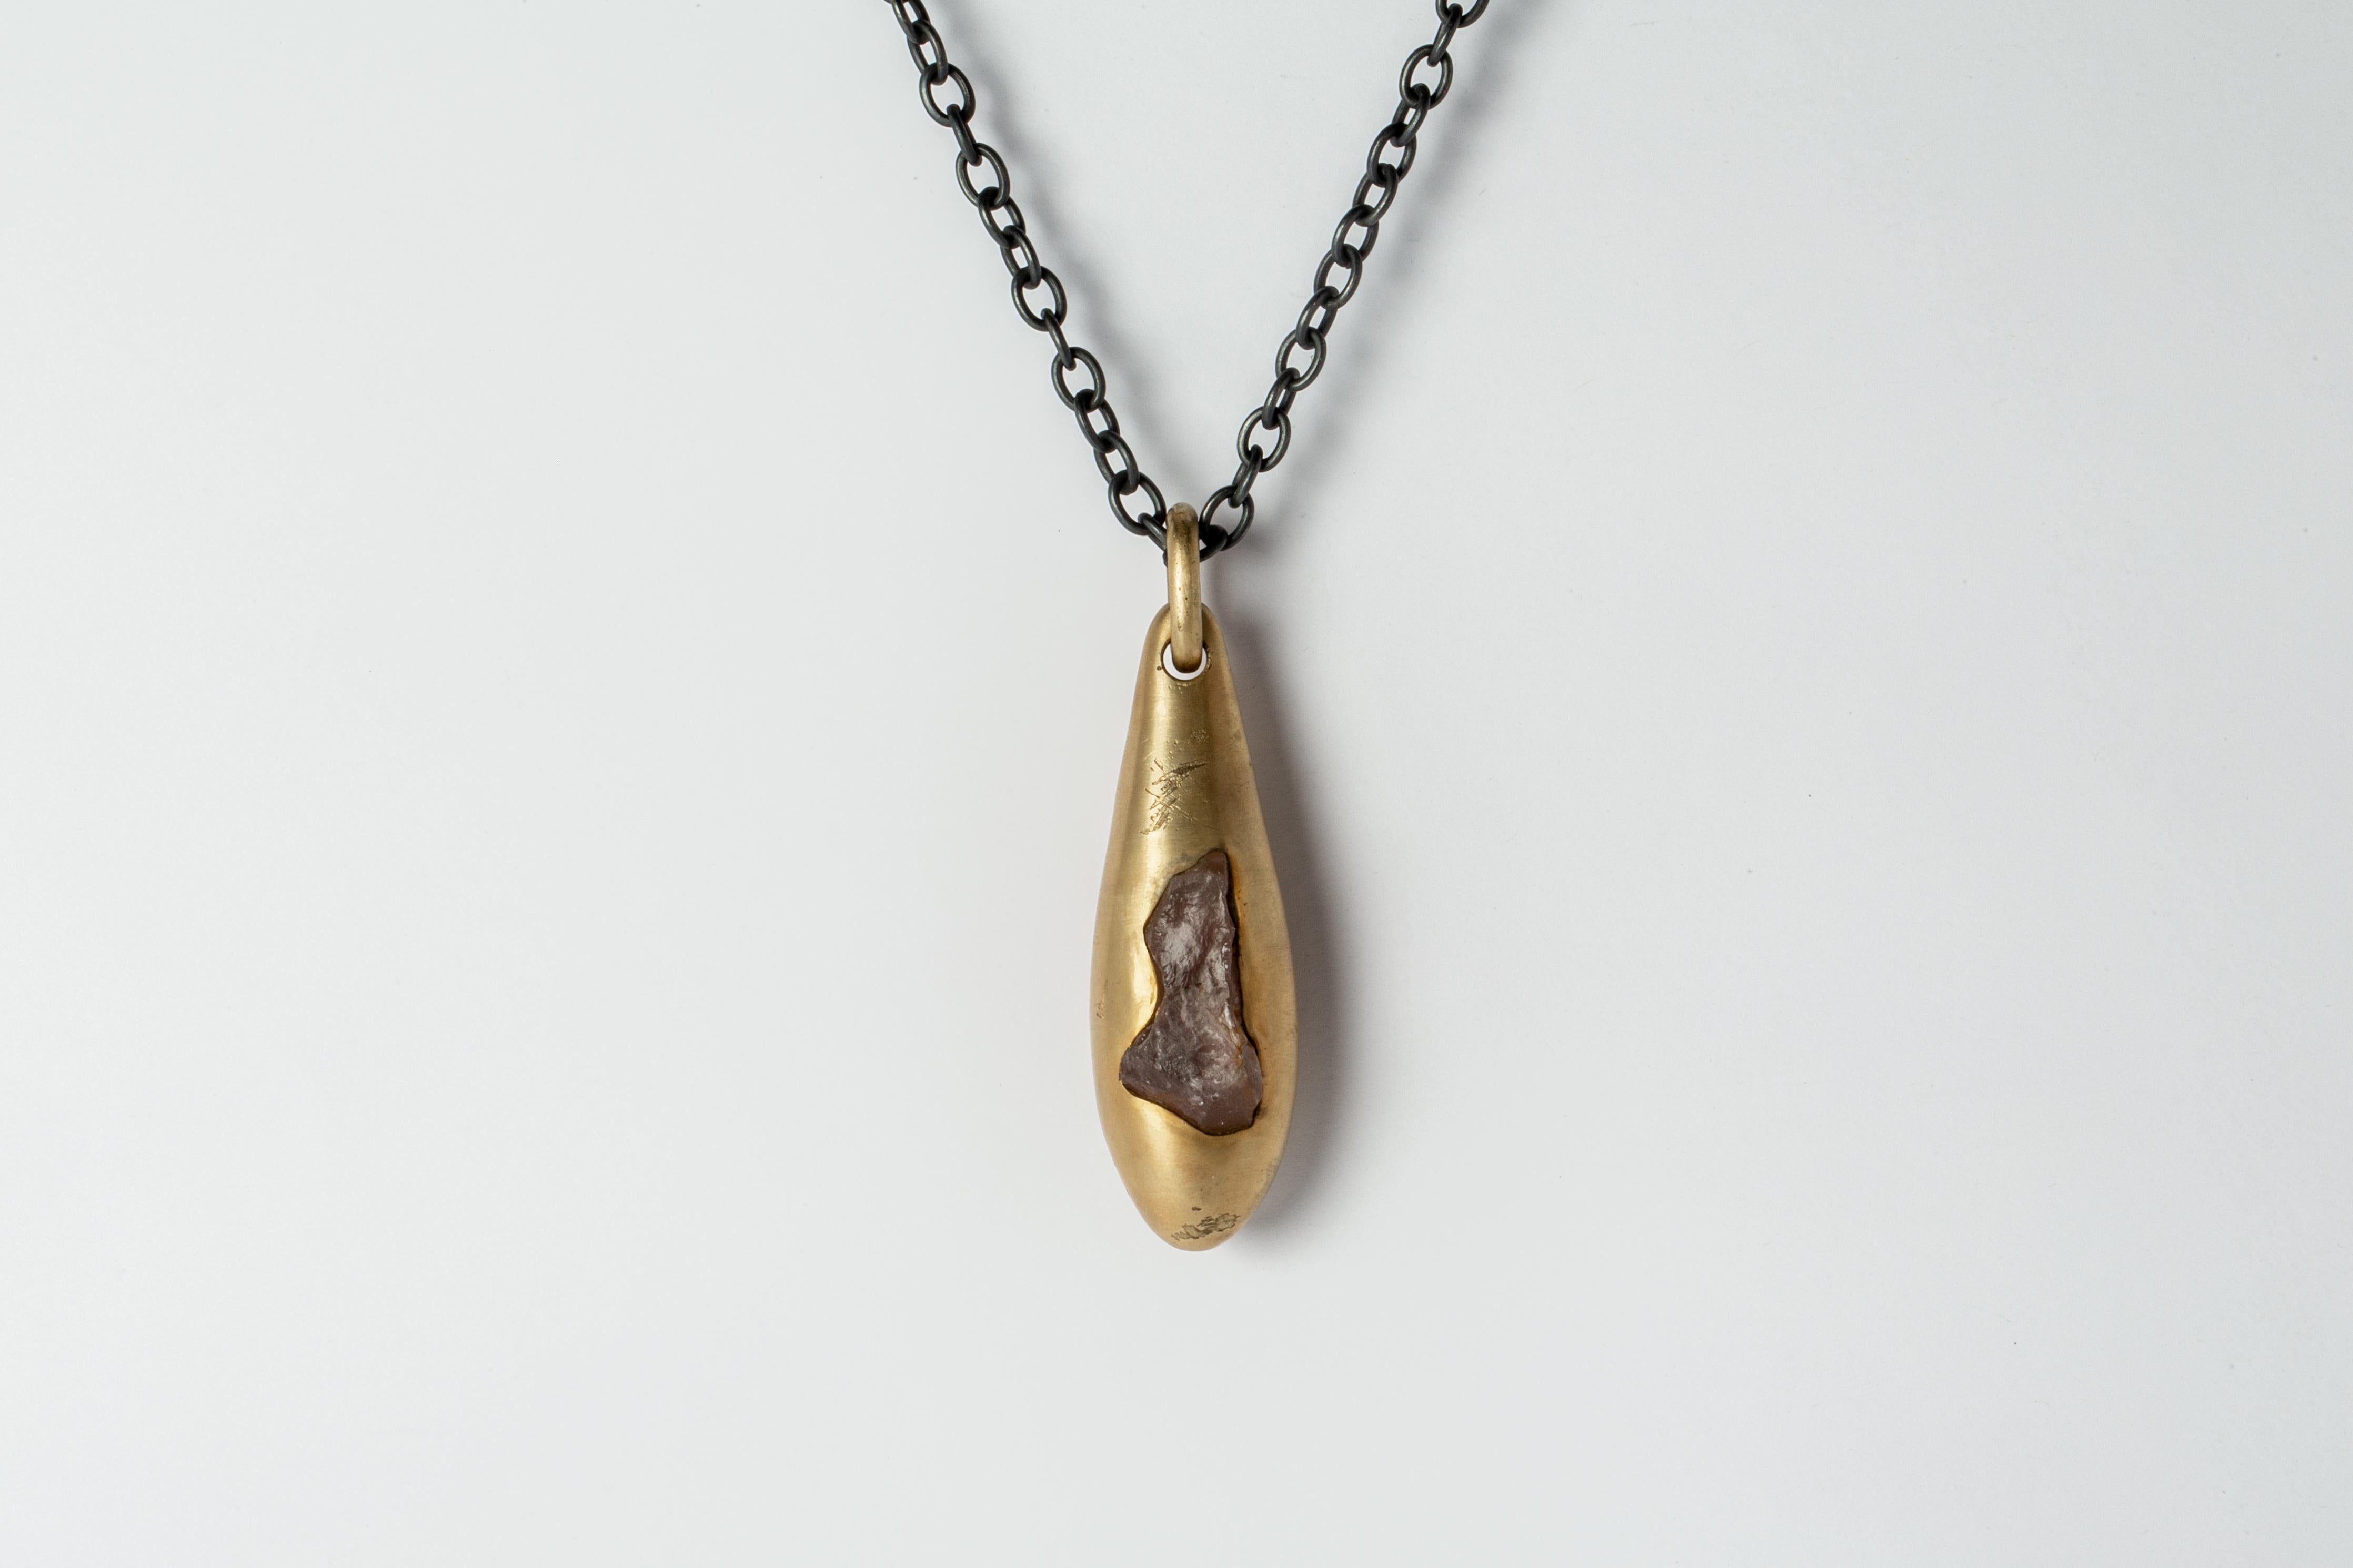 Necklace in brass with 18k gold, oxidized sterling silver, and a rough of rose quartz. The color of acid gold is came from brass substrate is electroplated with 18k gold and then dipped into acid to create the subtly destroyed surface. Its comes on